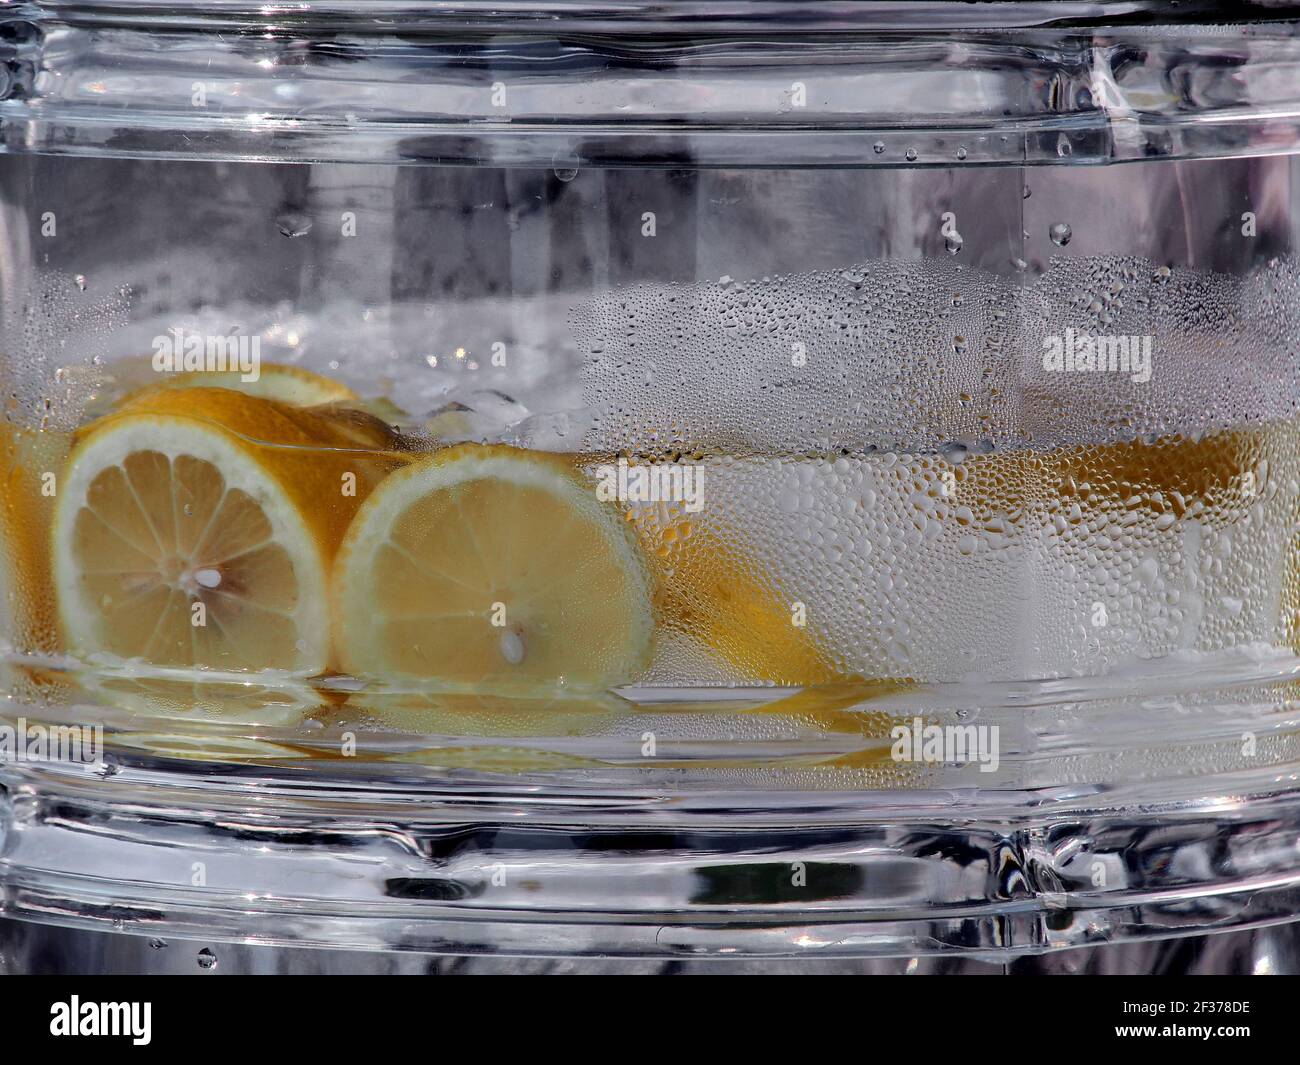 A large glass container of water with lemons. Stock Photo